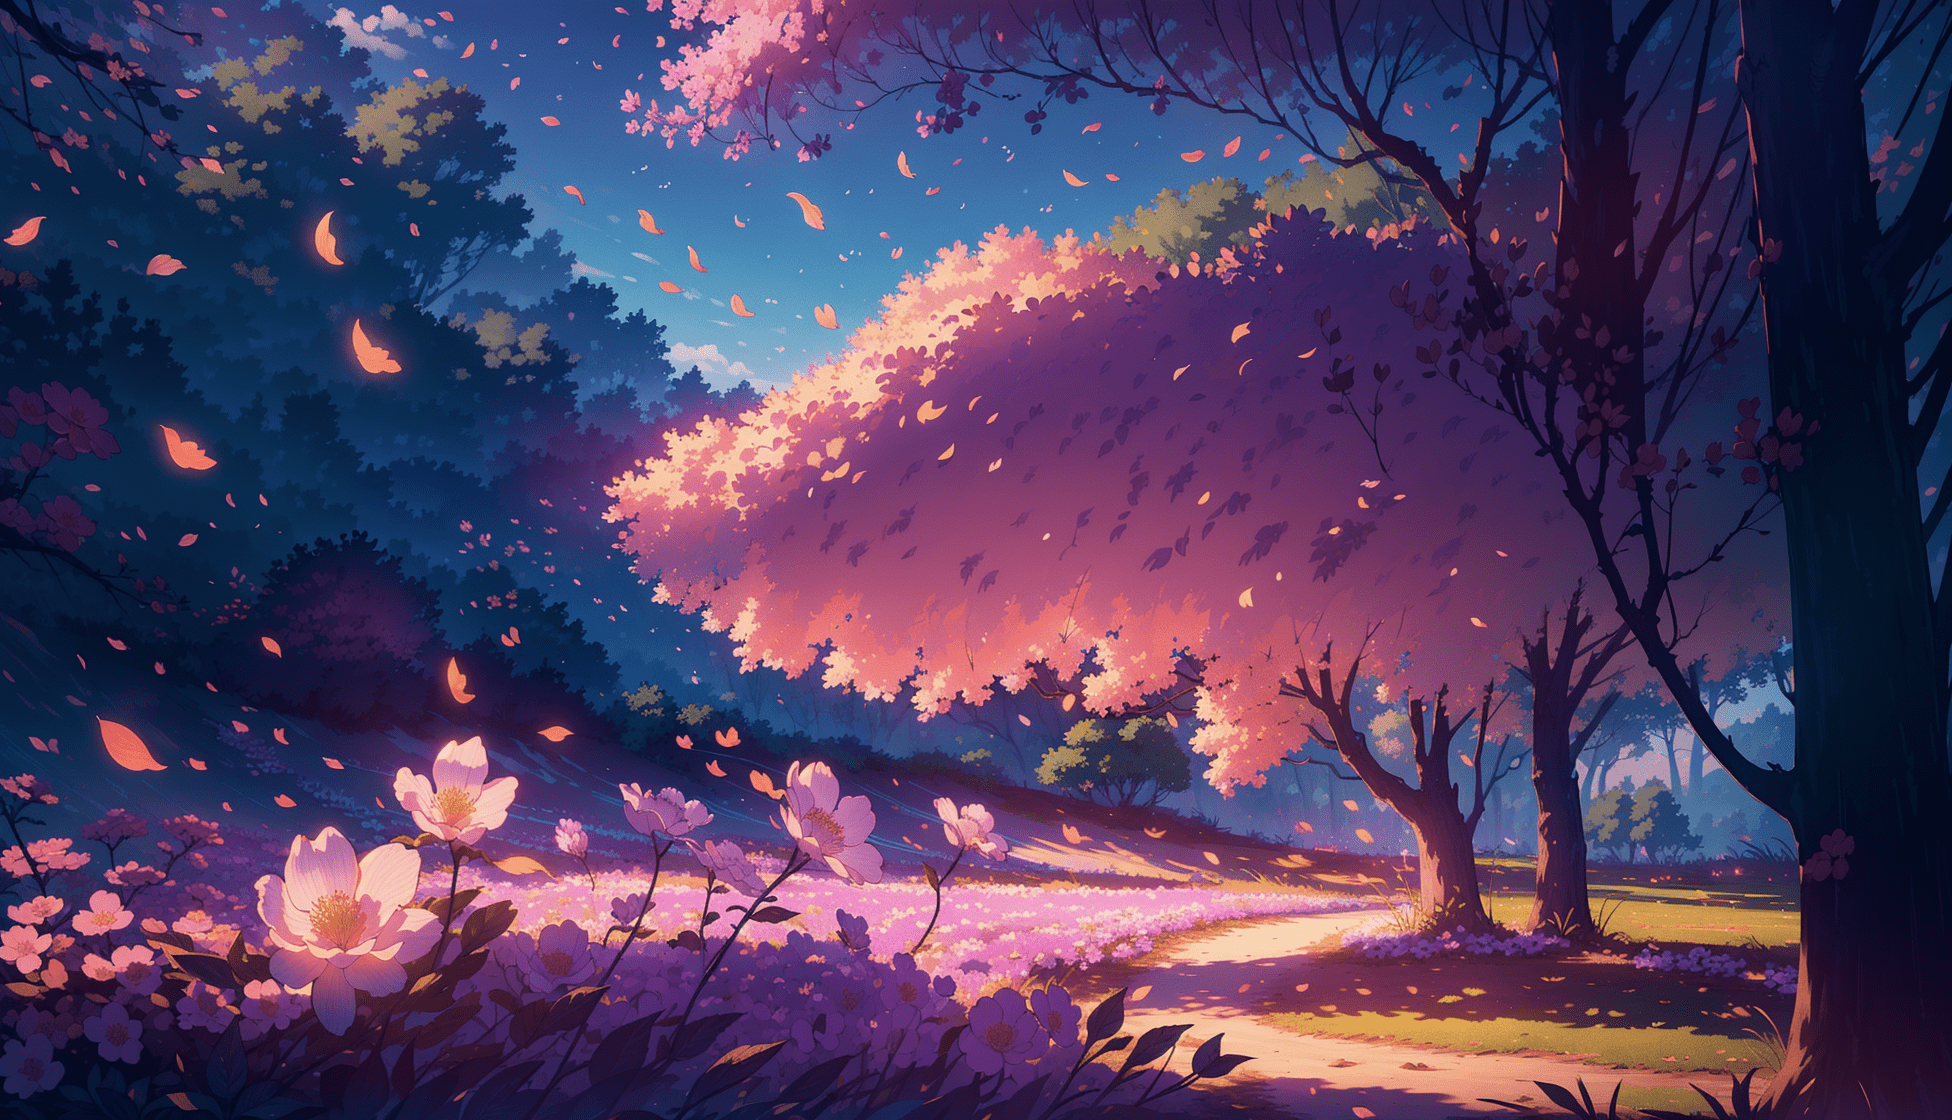 A digital painting of a forest with pink flowers - Anime landscape, scenery, landscape